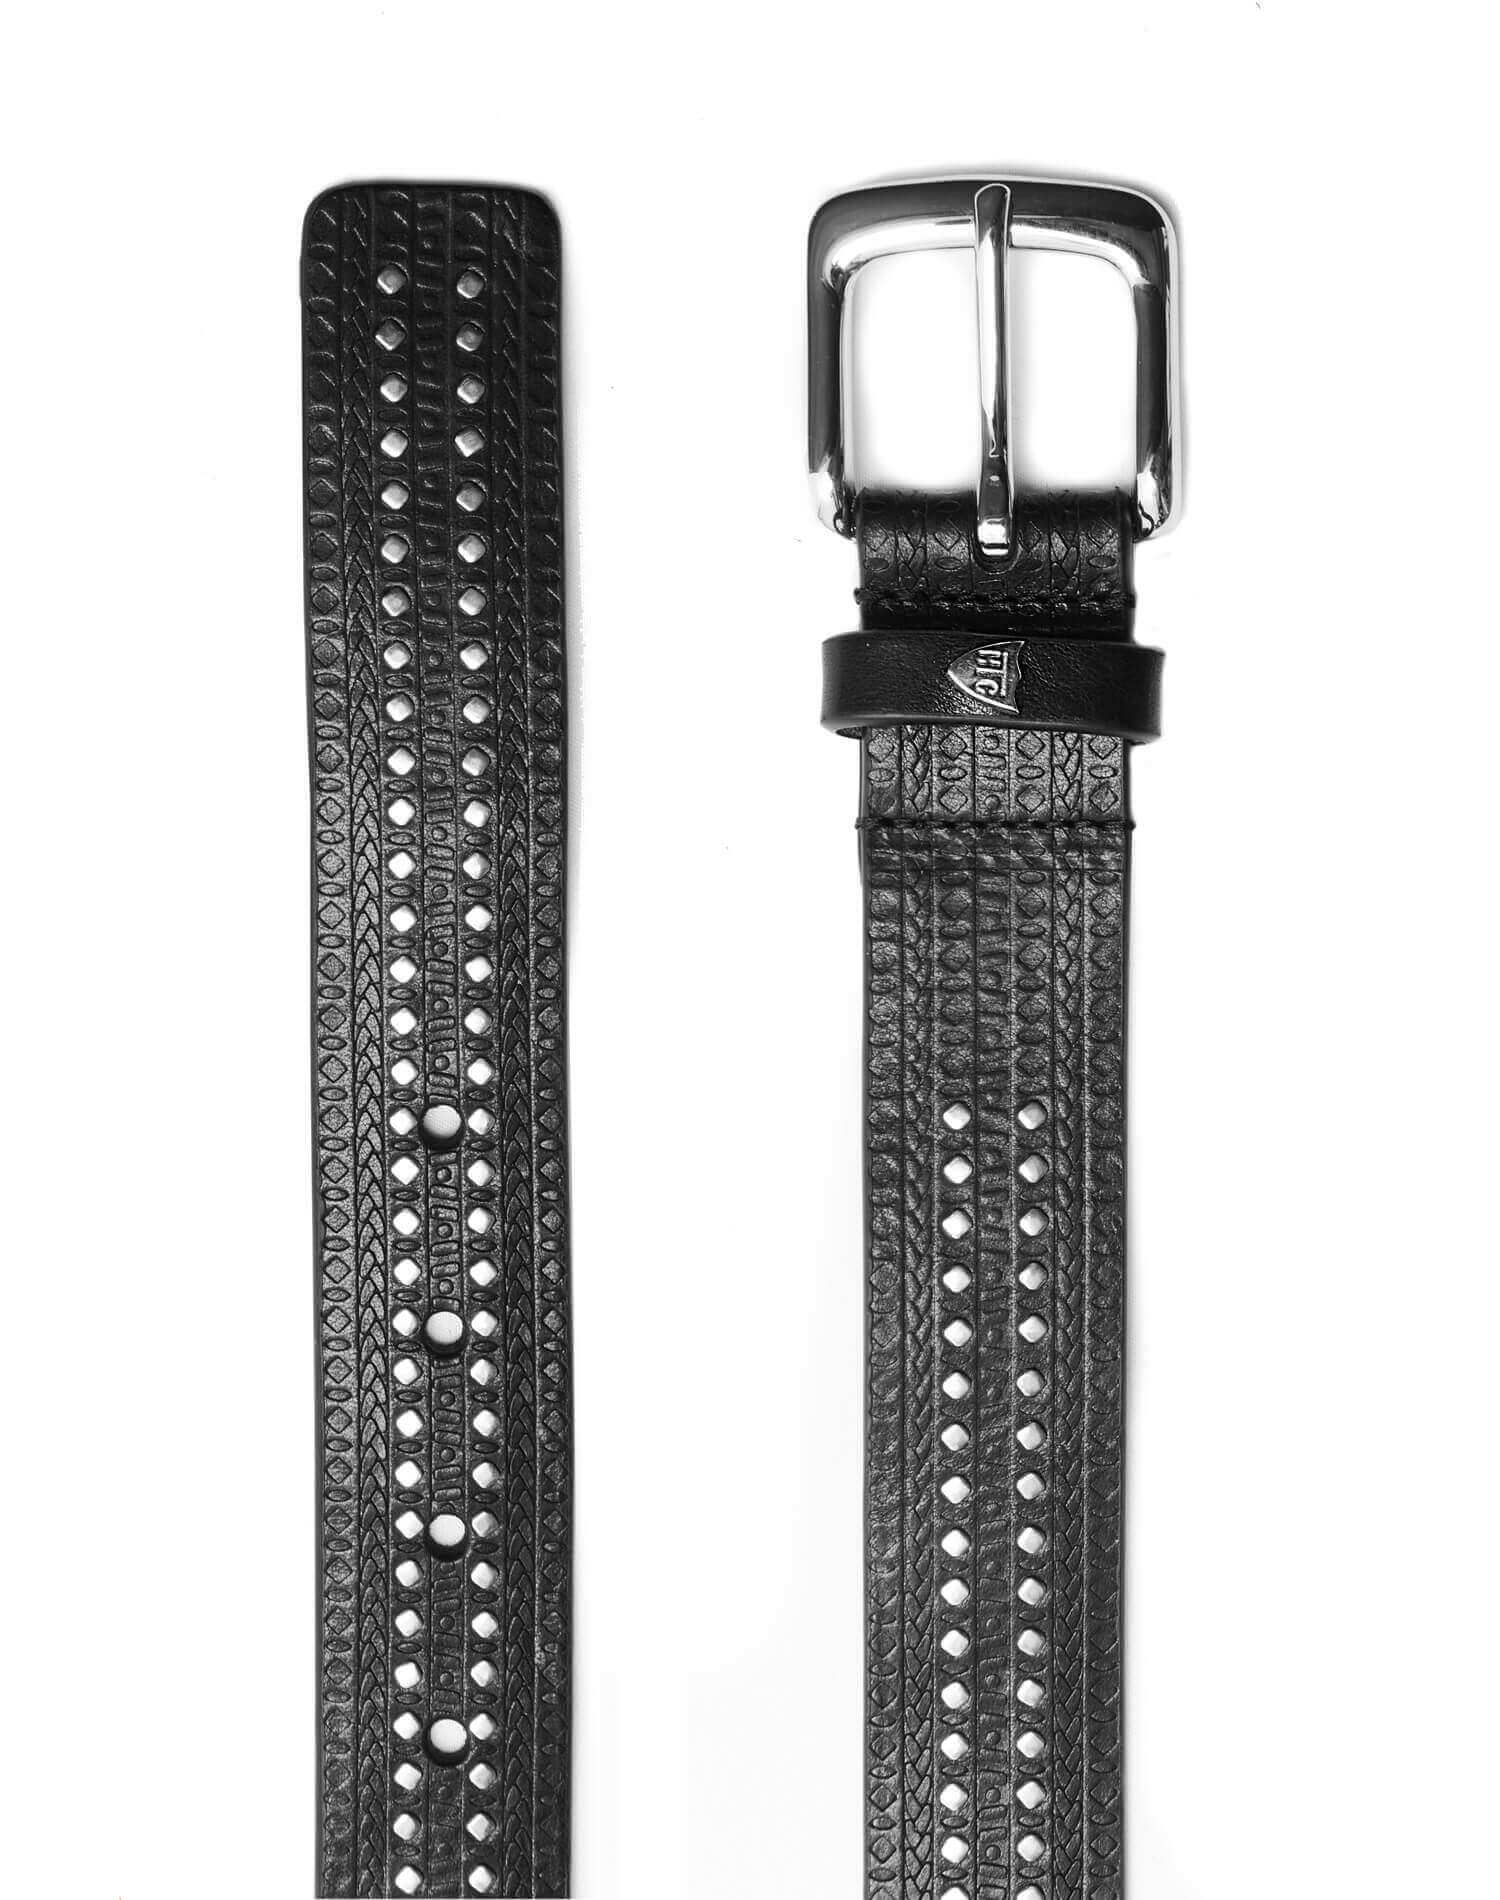 DEVO BELT Black leather belt with studs, brass buckle, studded zamac belt loop and rivet with HTC logo. Height: 3 cm. Made in Italy. HTC LOS ANGELES